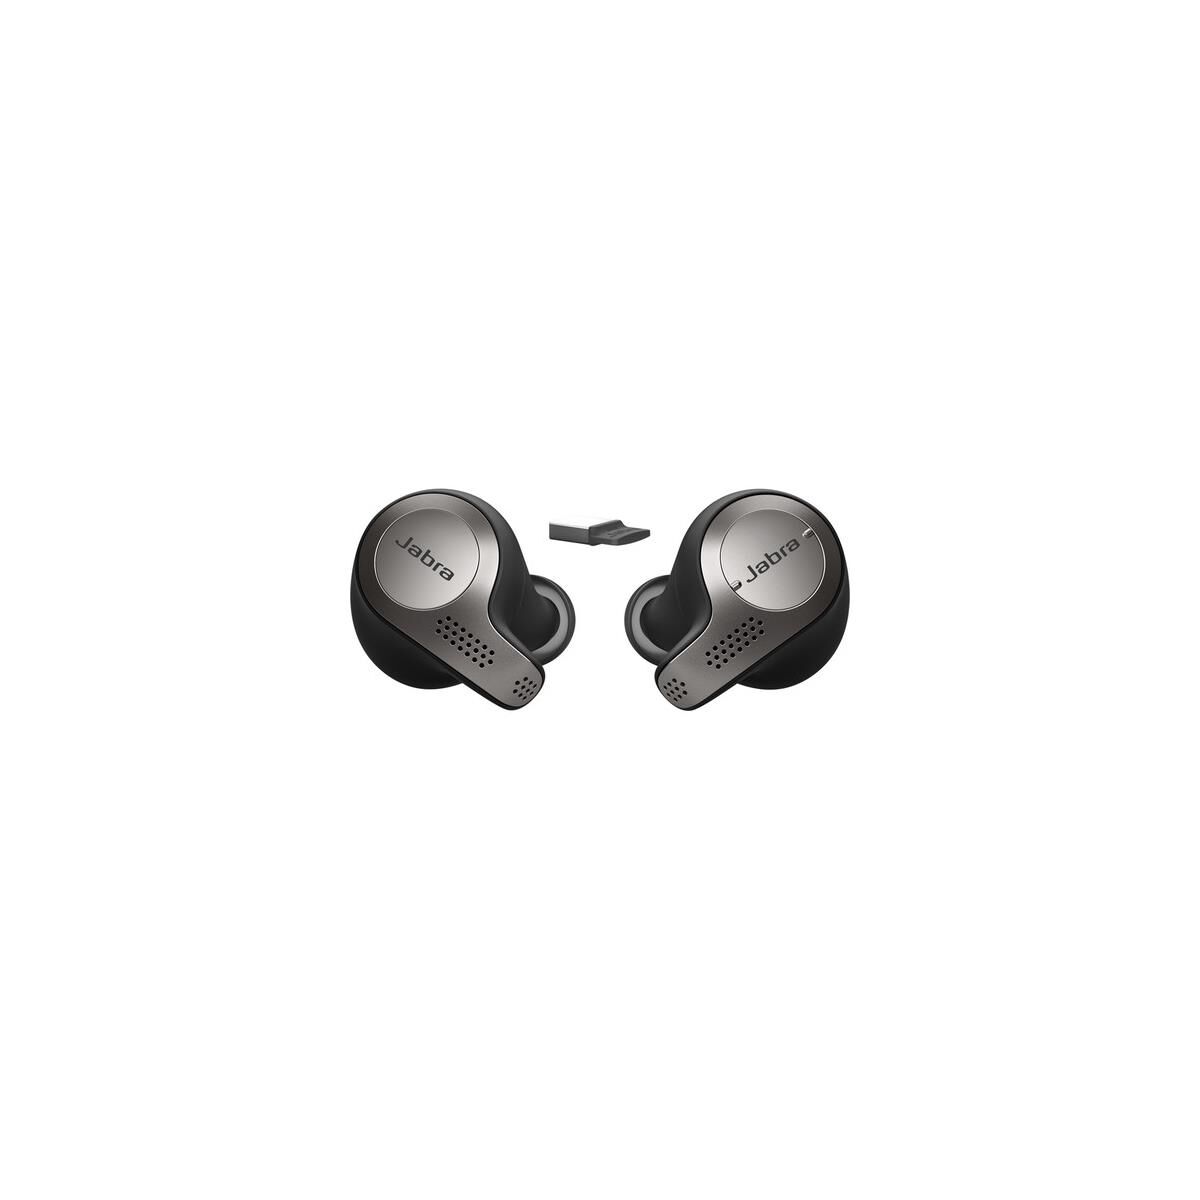 Jabra Evolve 65t MS Wireless Earbuds with Link 370 USB Adapter